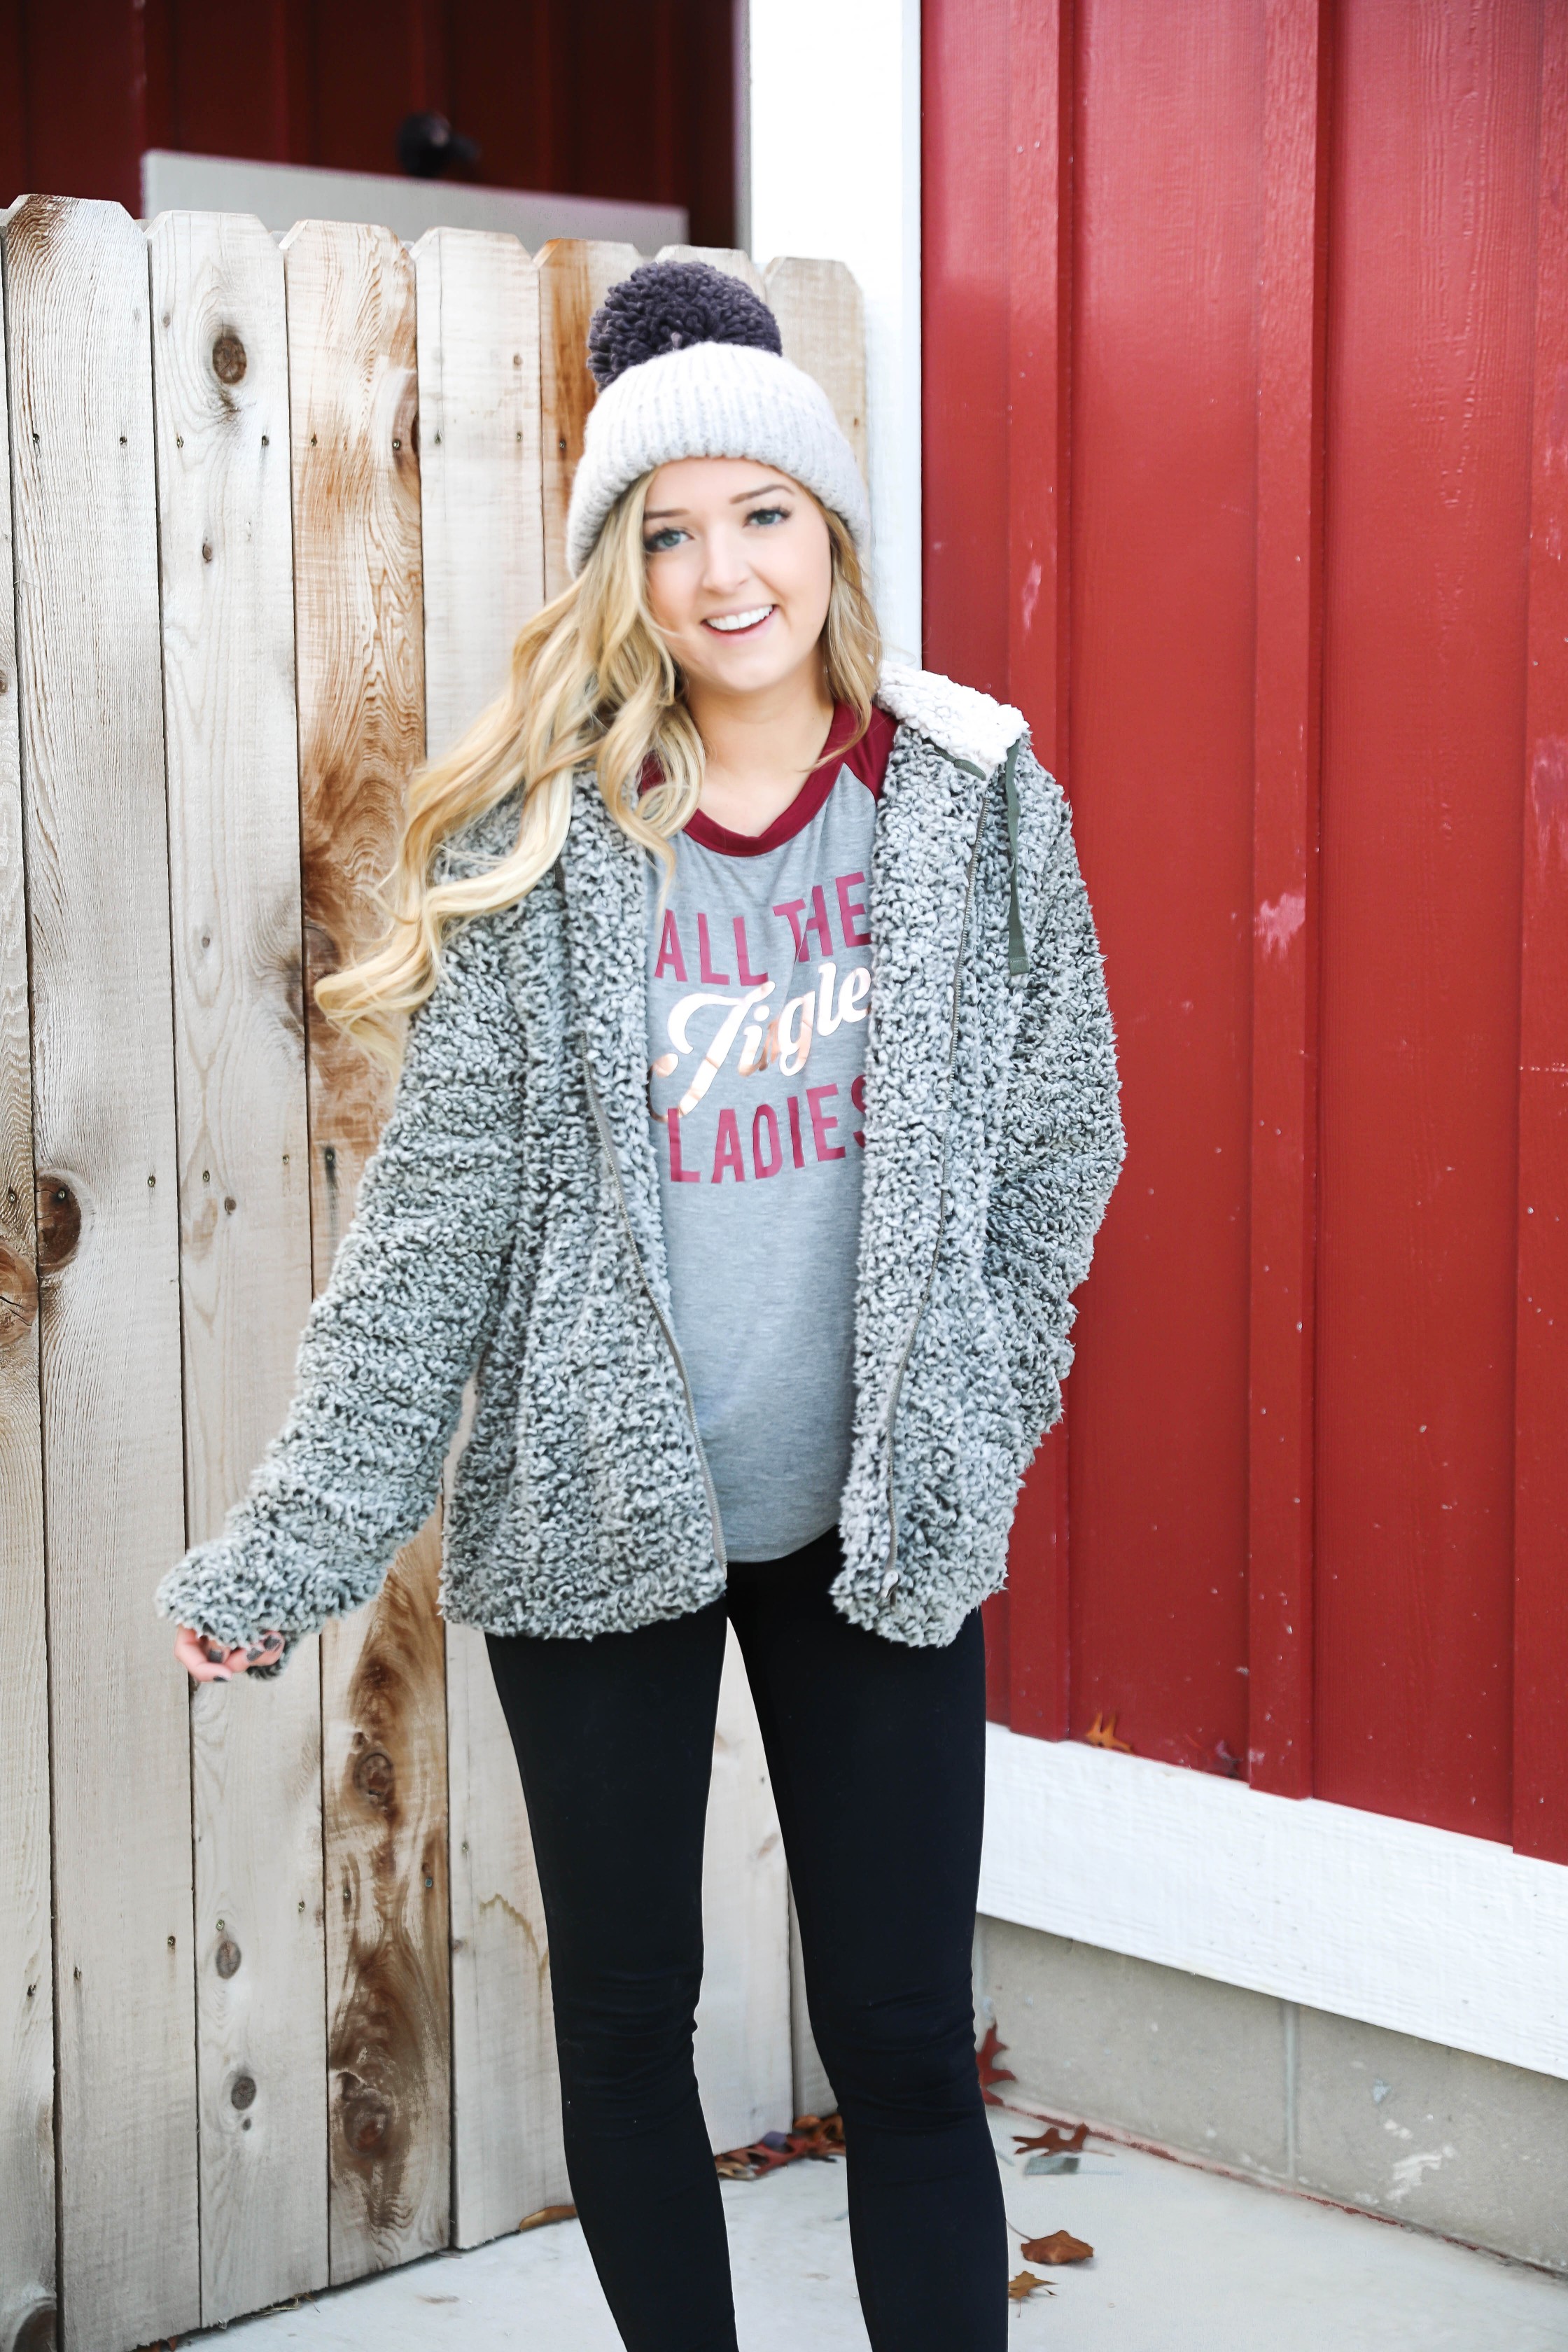 The softest sherpa zip up jacket! This Jacket is so comfortable and adorable for the holidays! I wore it with this cute grey beanie and all the jingle ladies shirt! Cute idea for a comfy winter outfit! Details on fashion blog daily dose of charm by lauren lindmark